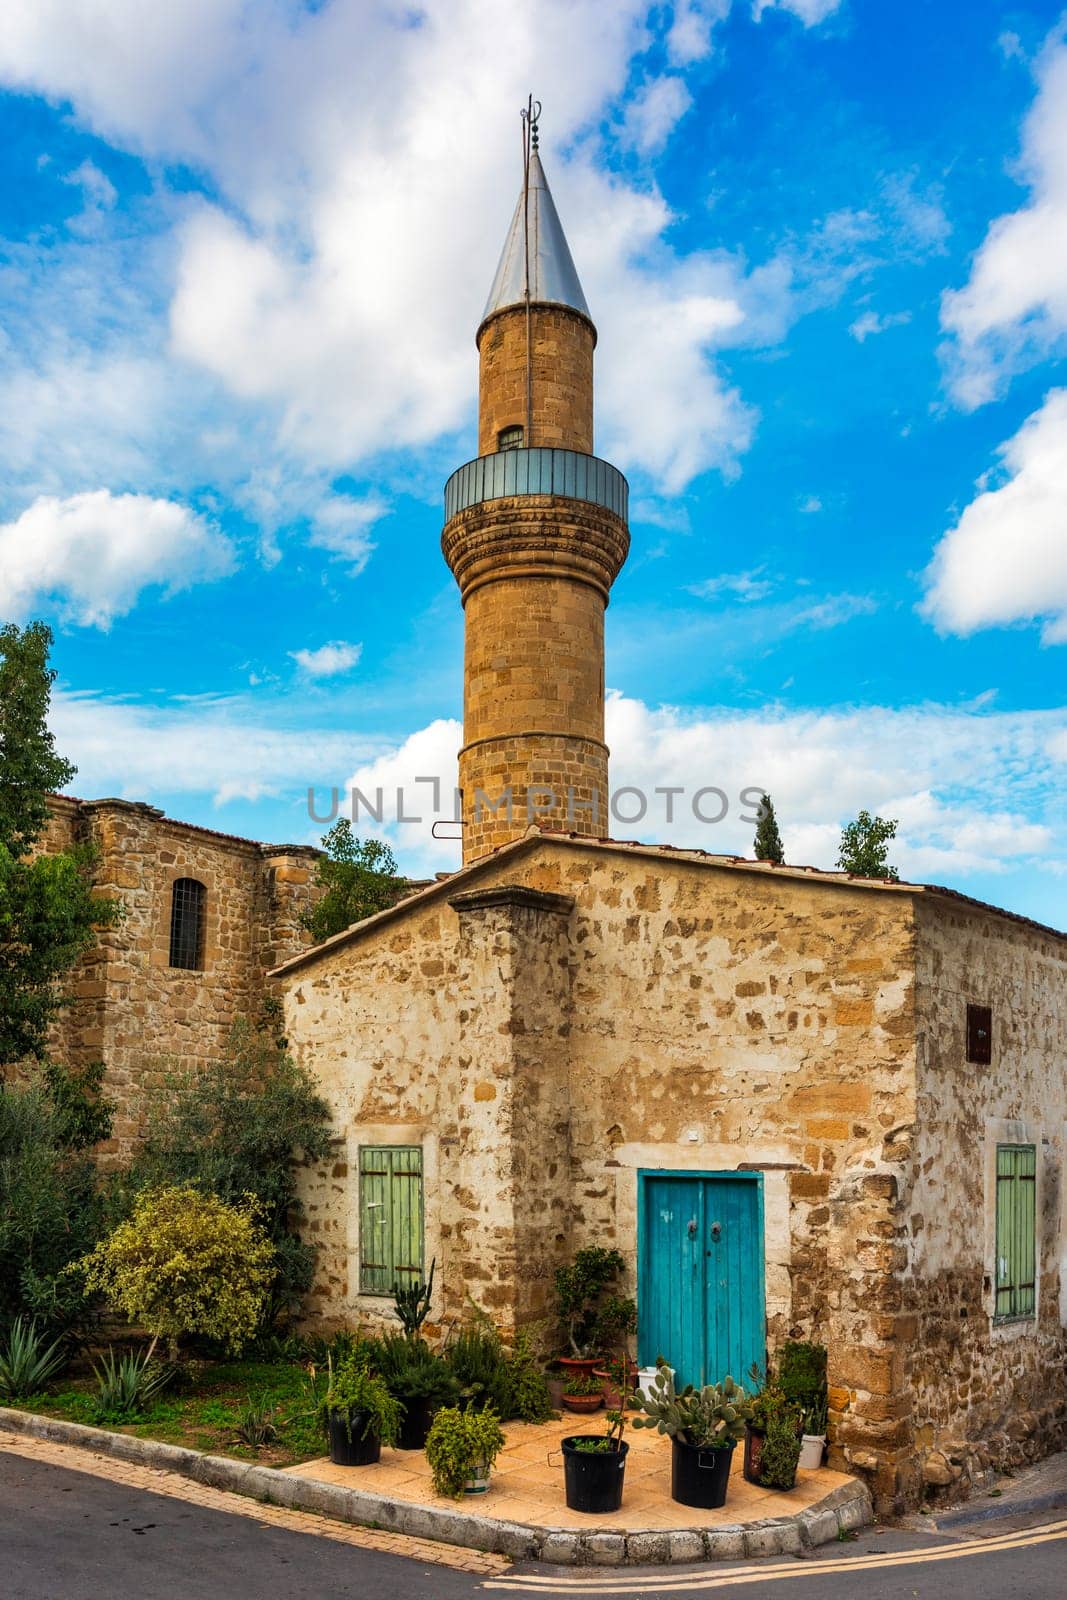 A small building with a blue door sits in front of a large Mosque with a tall tower in Nicosia, Cyprus. Beautiful street with old architecture in Nicosia, Cyprus. by DaLiu